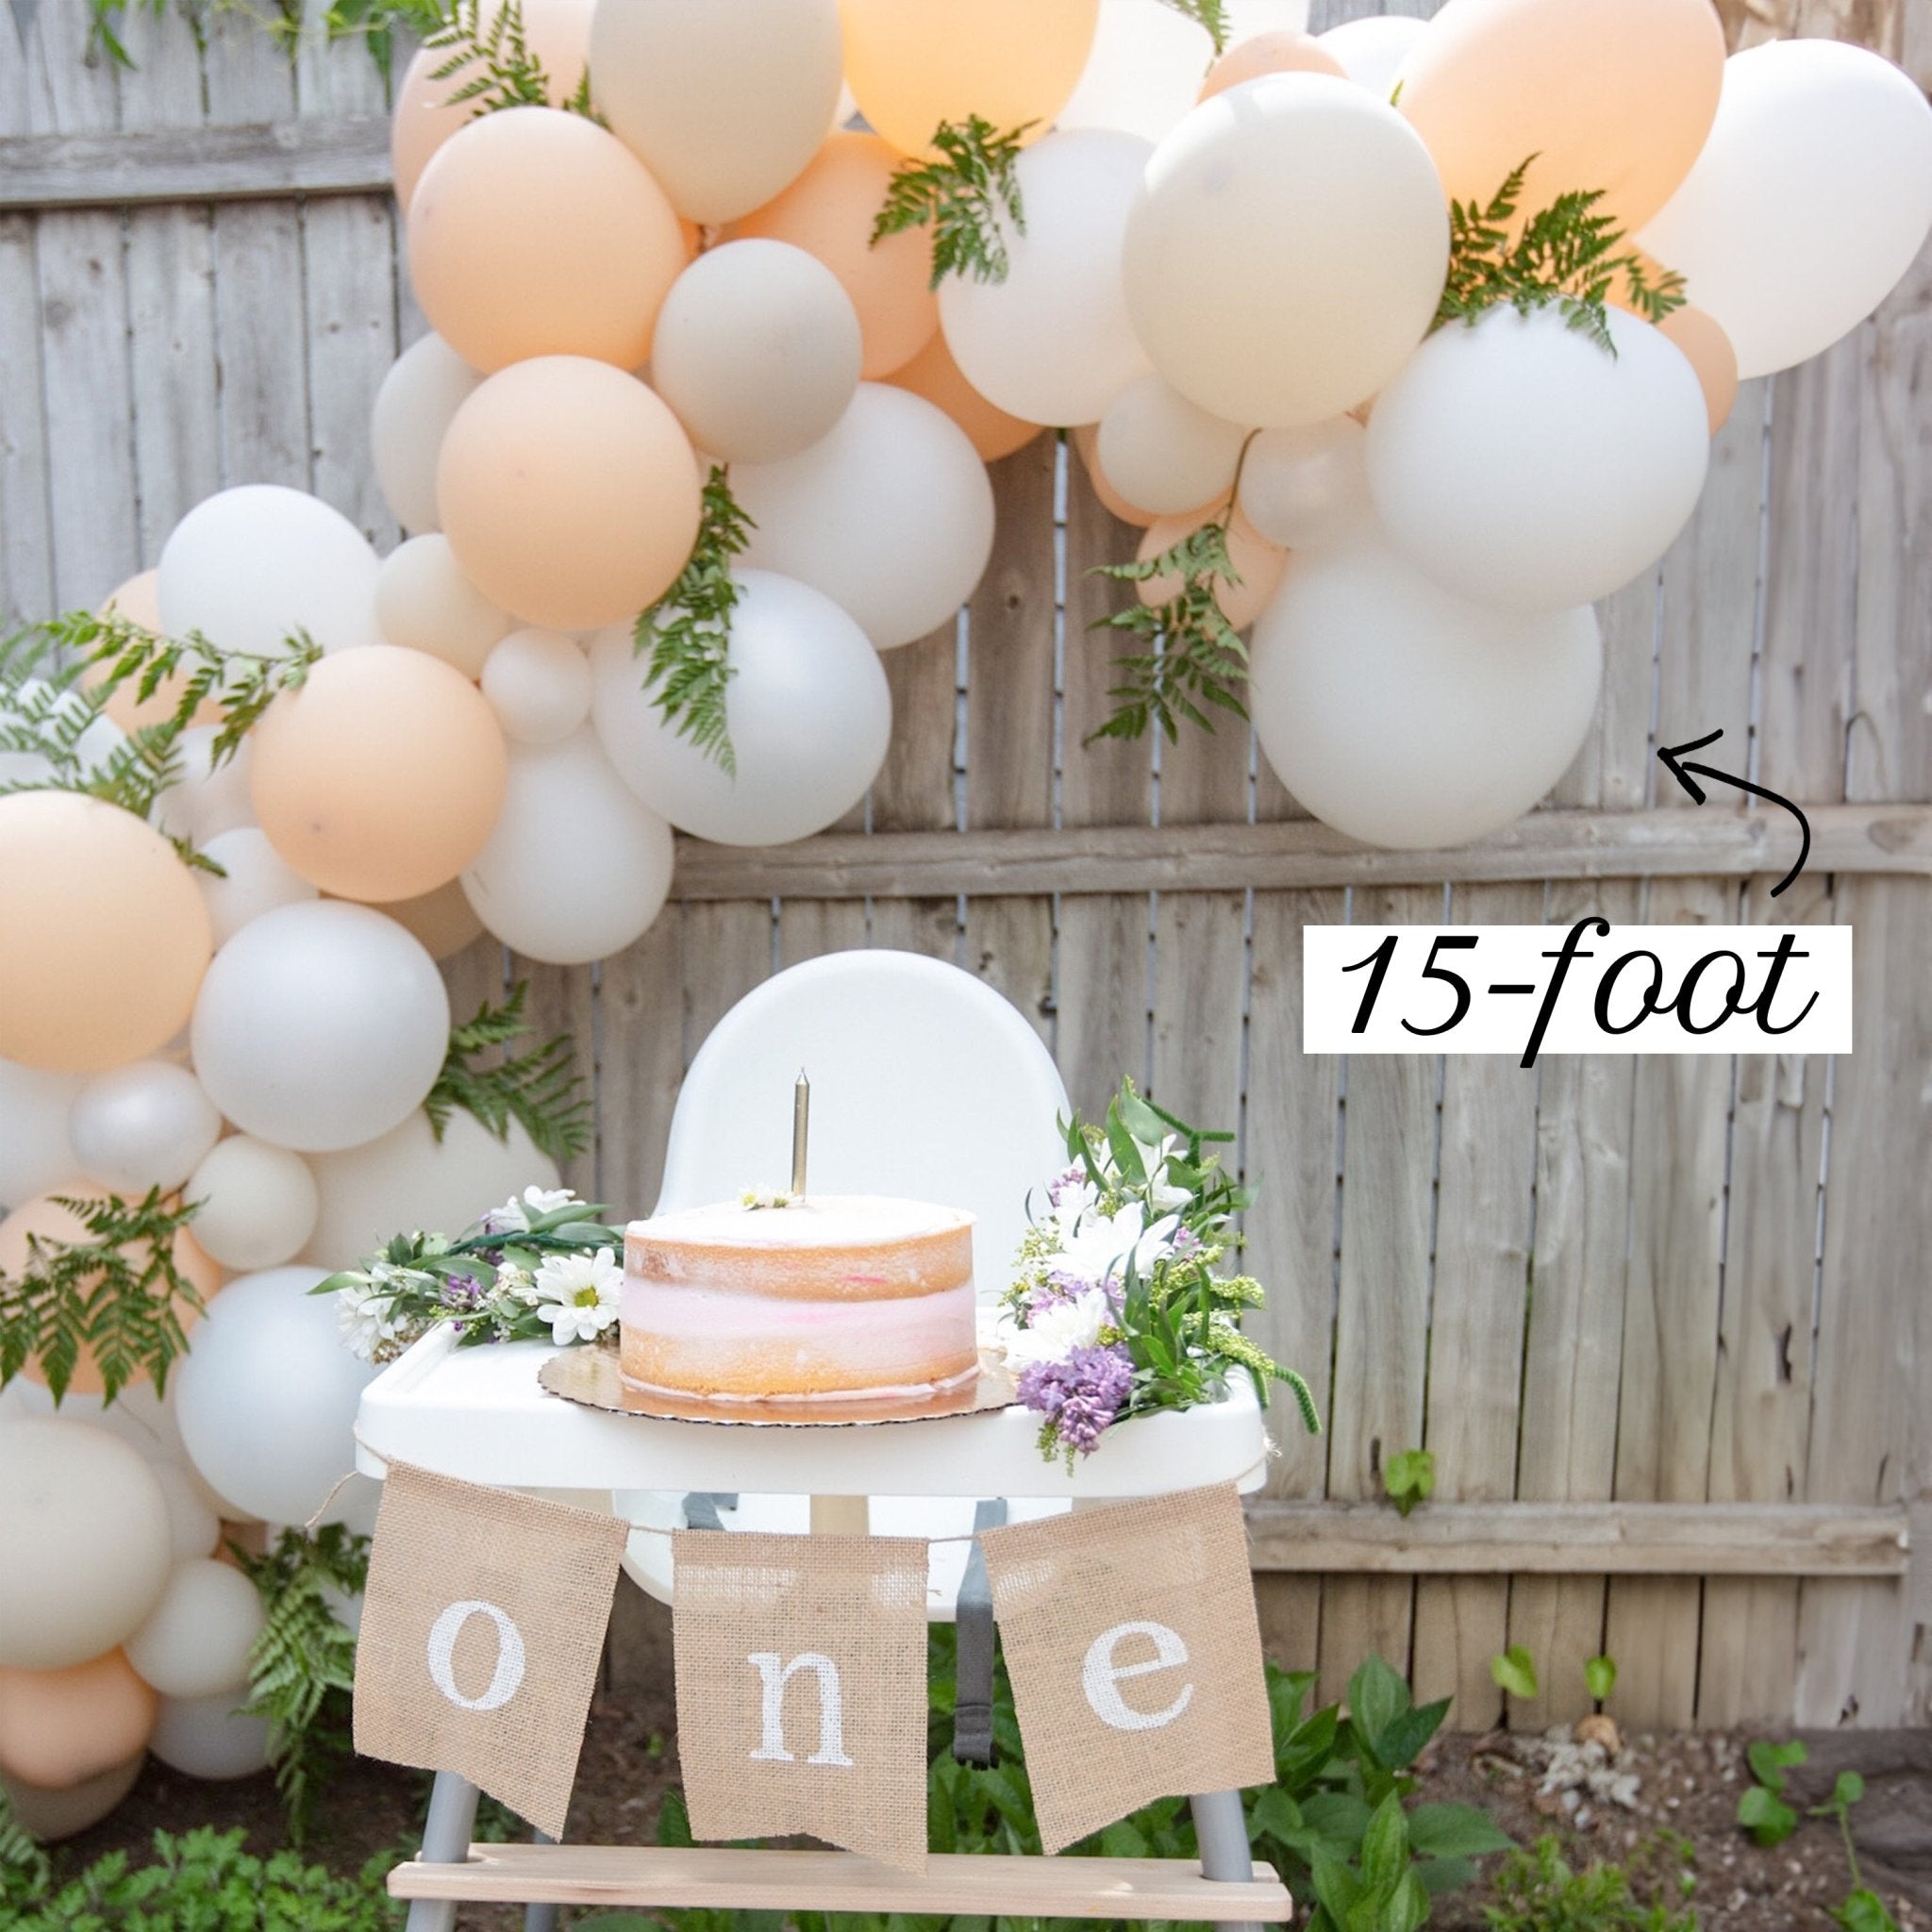 How to Make a Balloon Arch Balloon Garland The Ultimate Guide